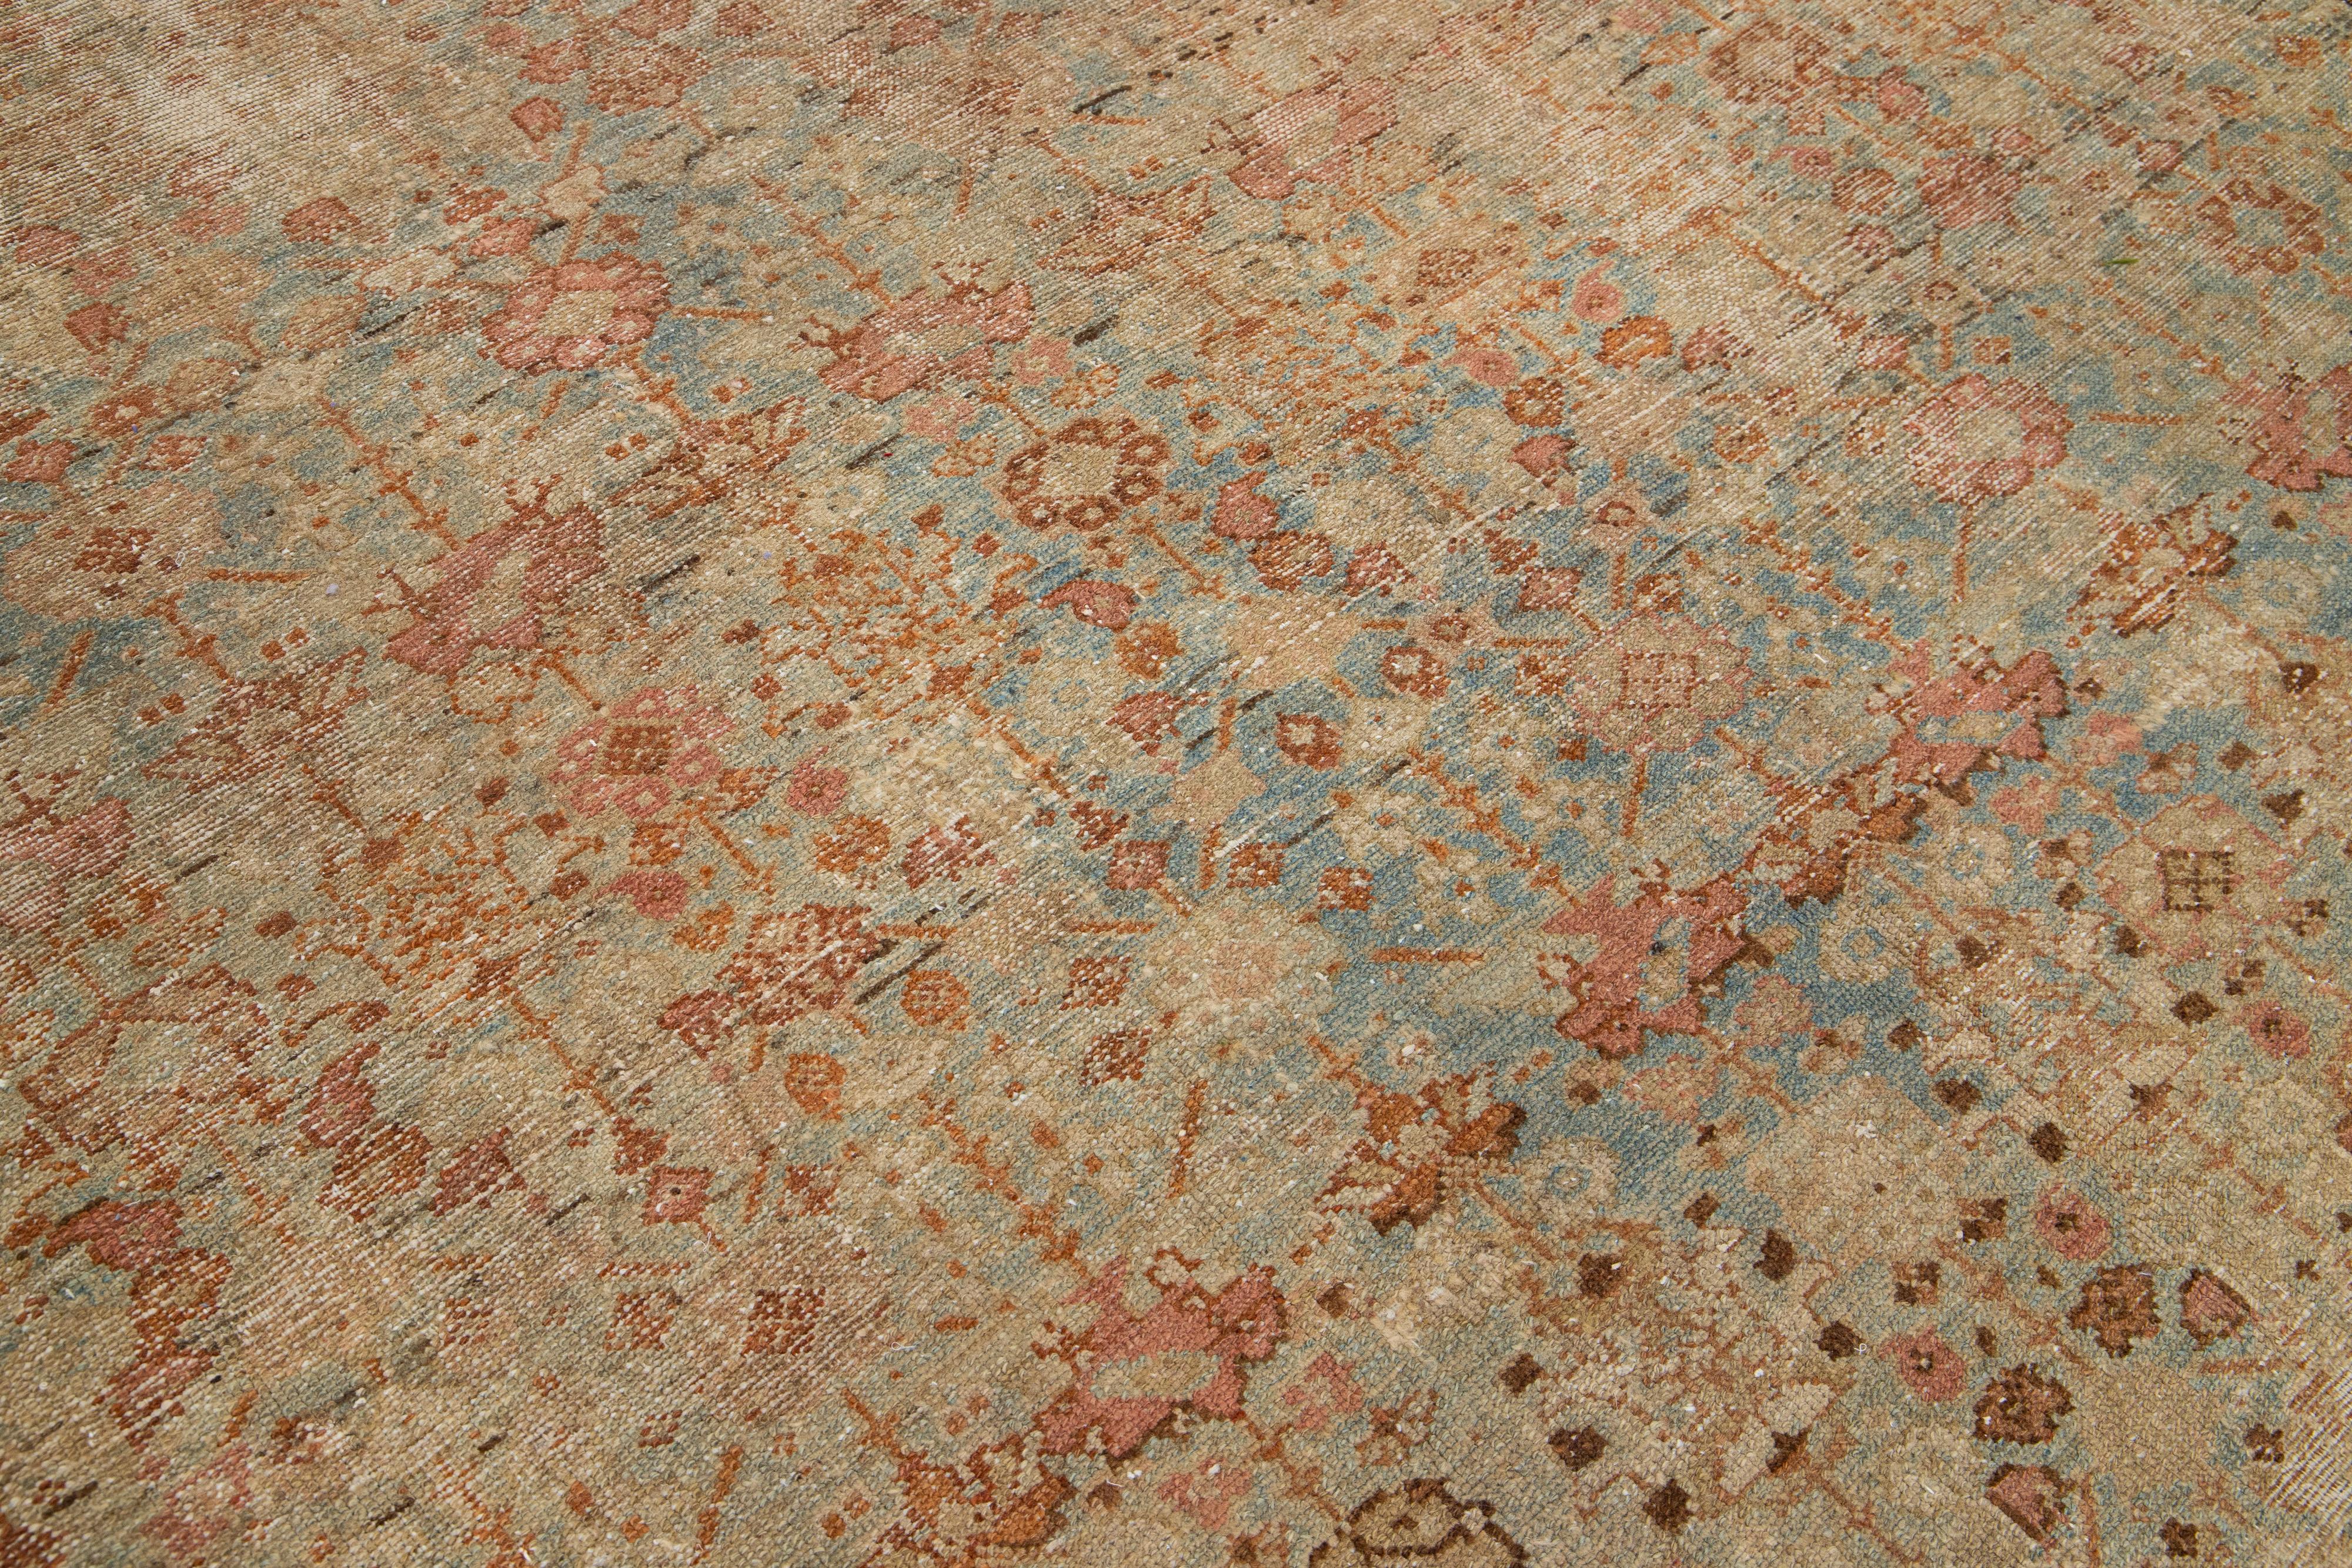 20th Century Handmade Antique Persian Malayer Wool Rug With Floral Motif From the 1920s For Sale